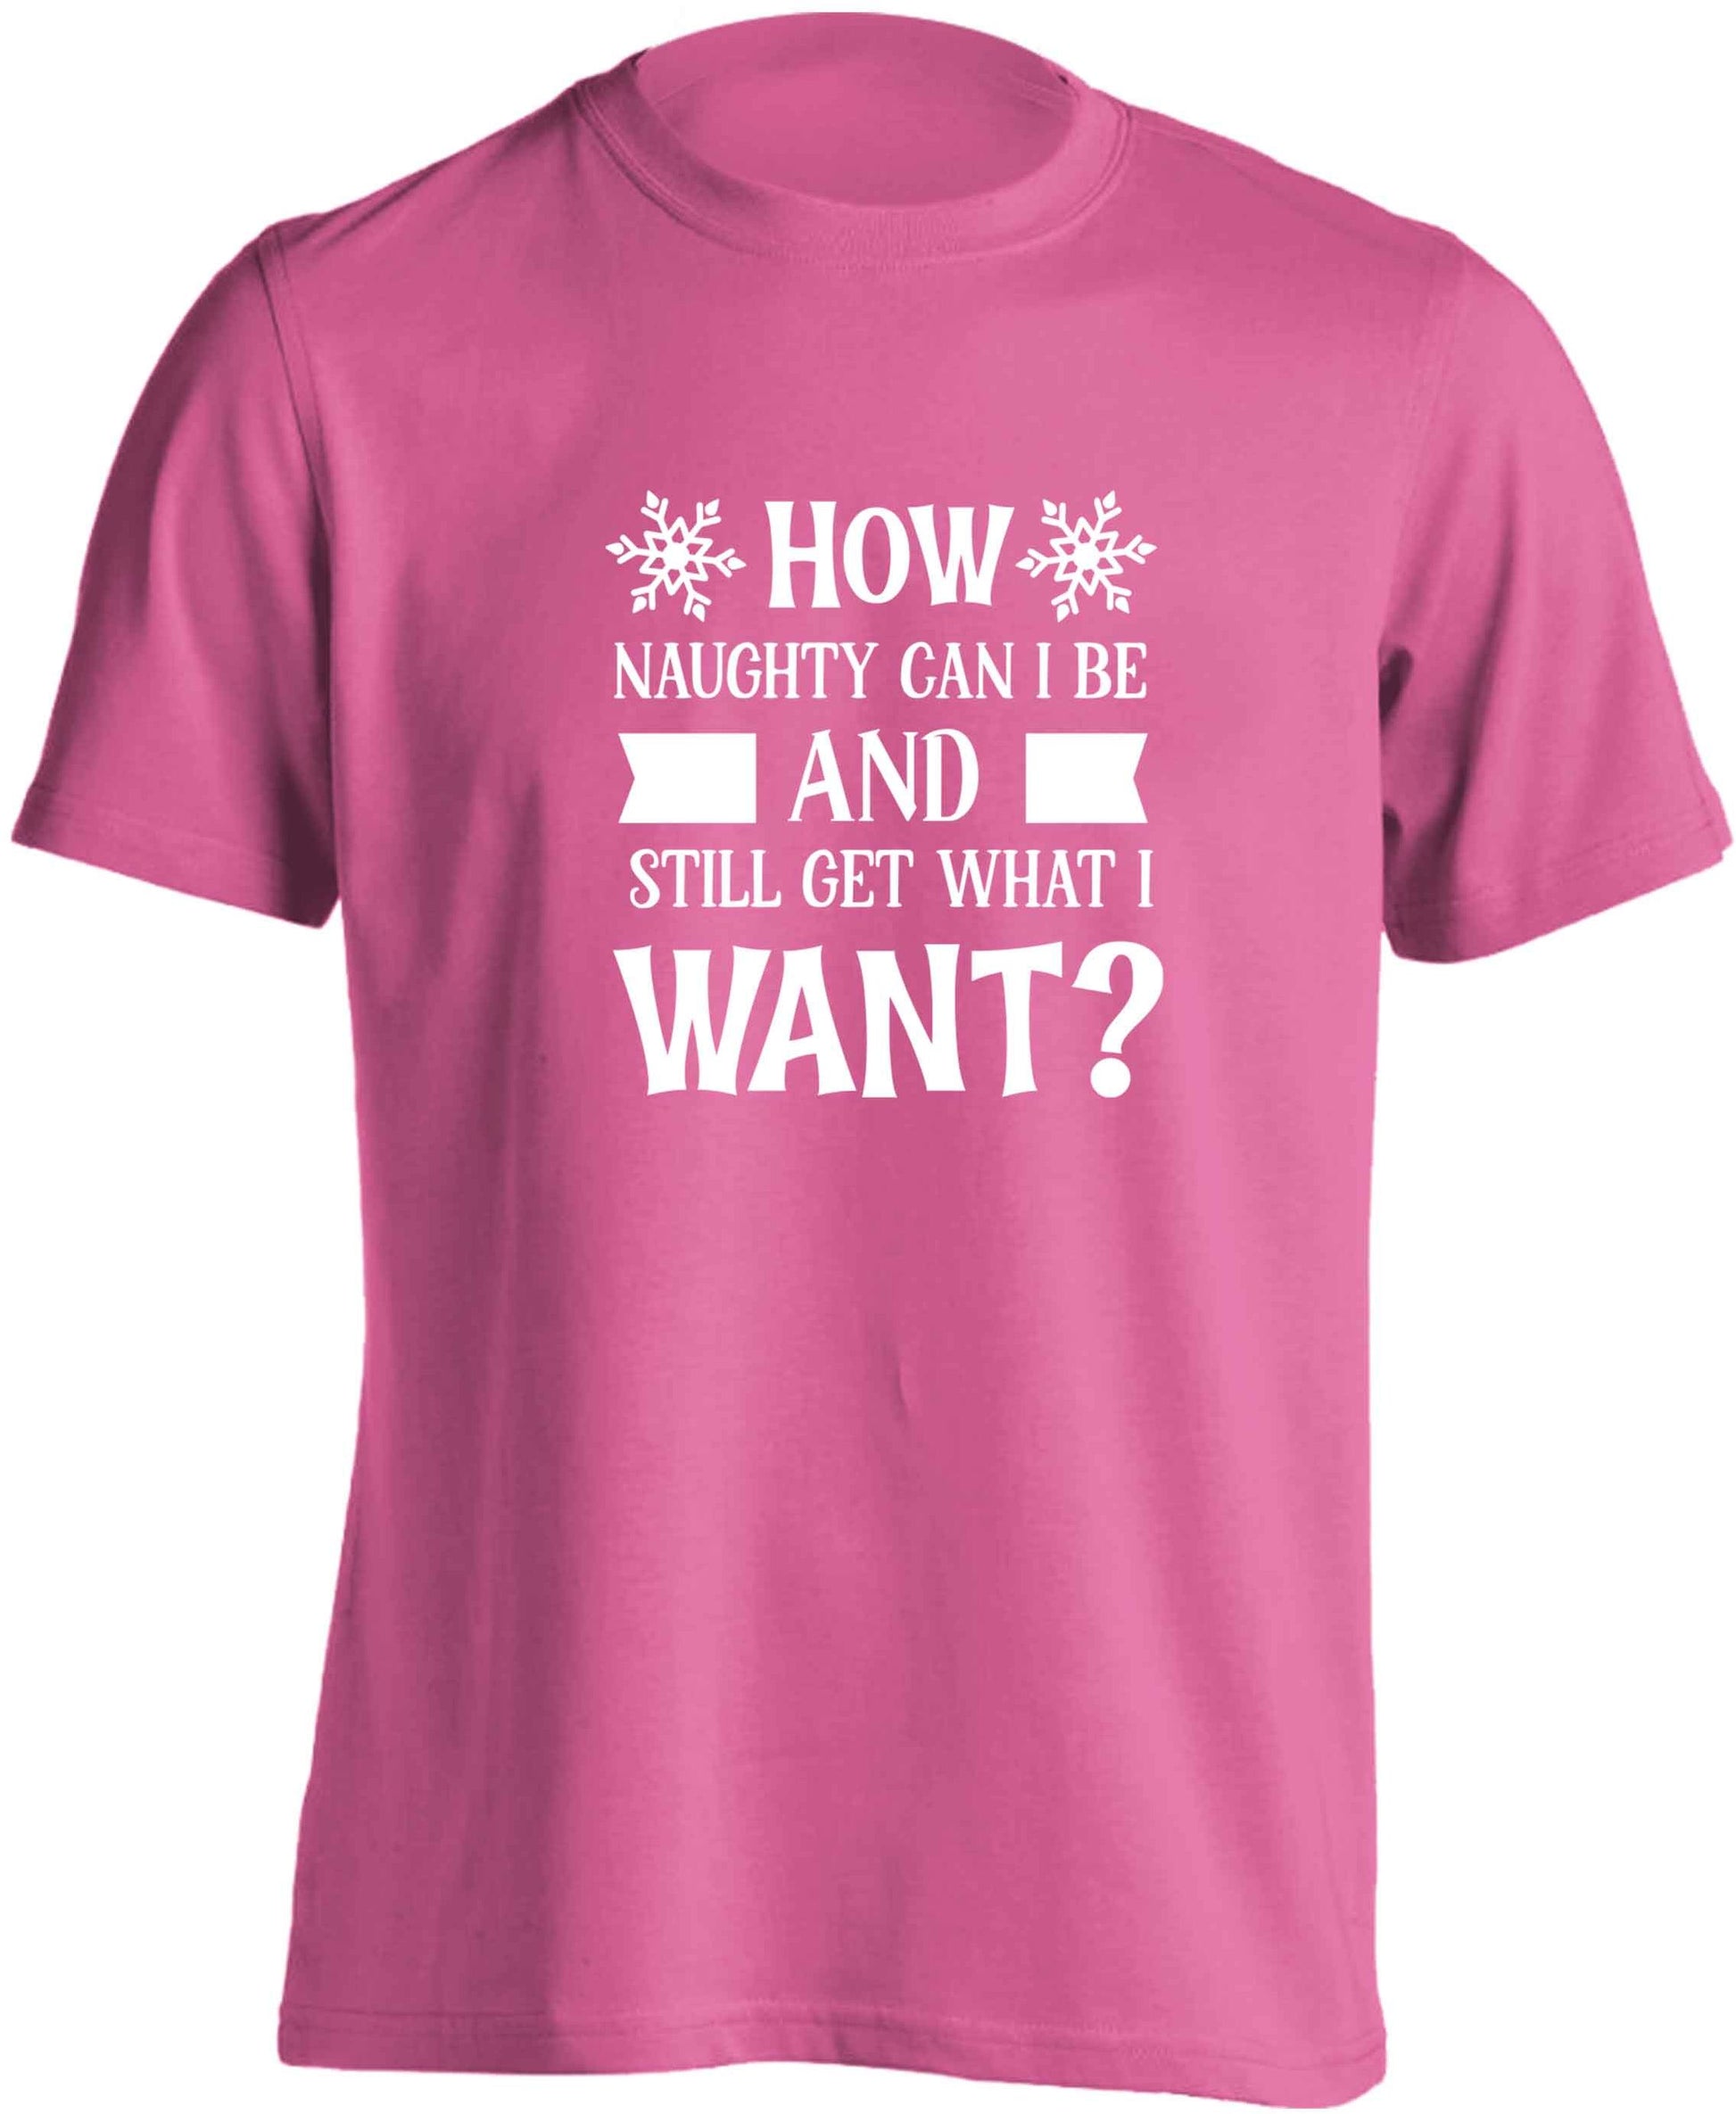 How naughty can I be and still get what I want? adults unisex pink Tshirt 2XL